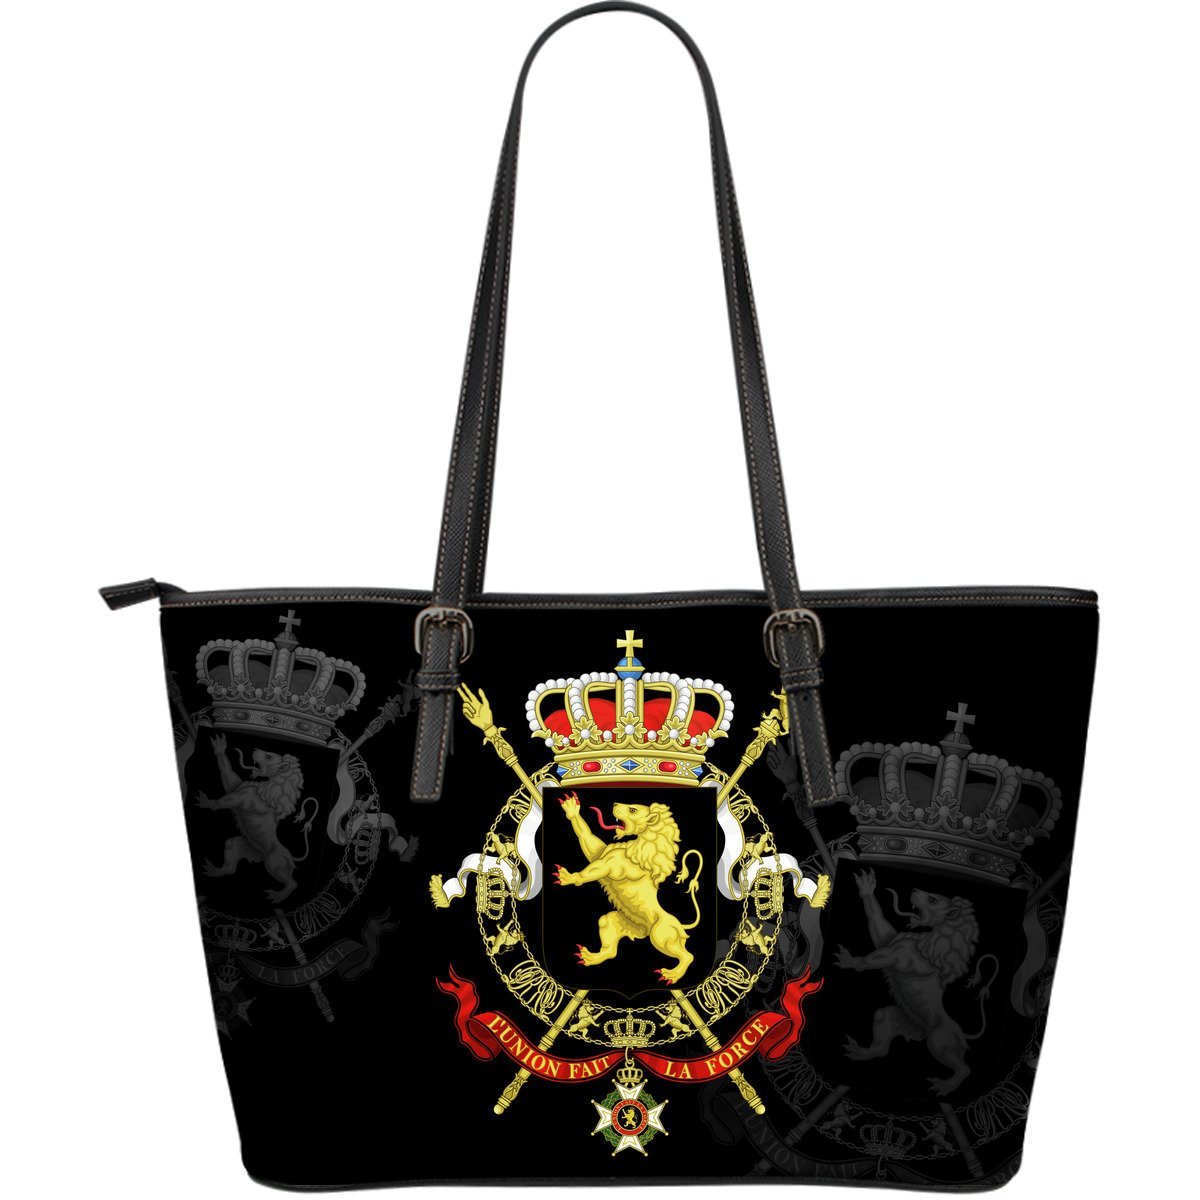 belgium-leather-tote-bag-large-size